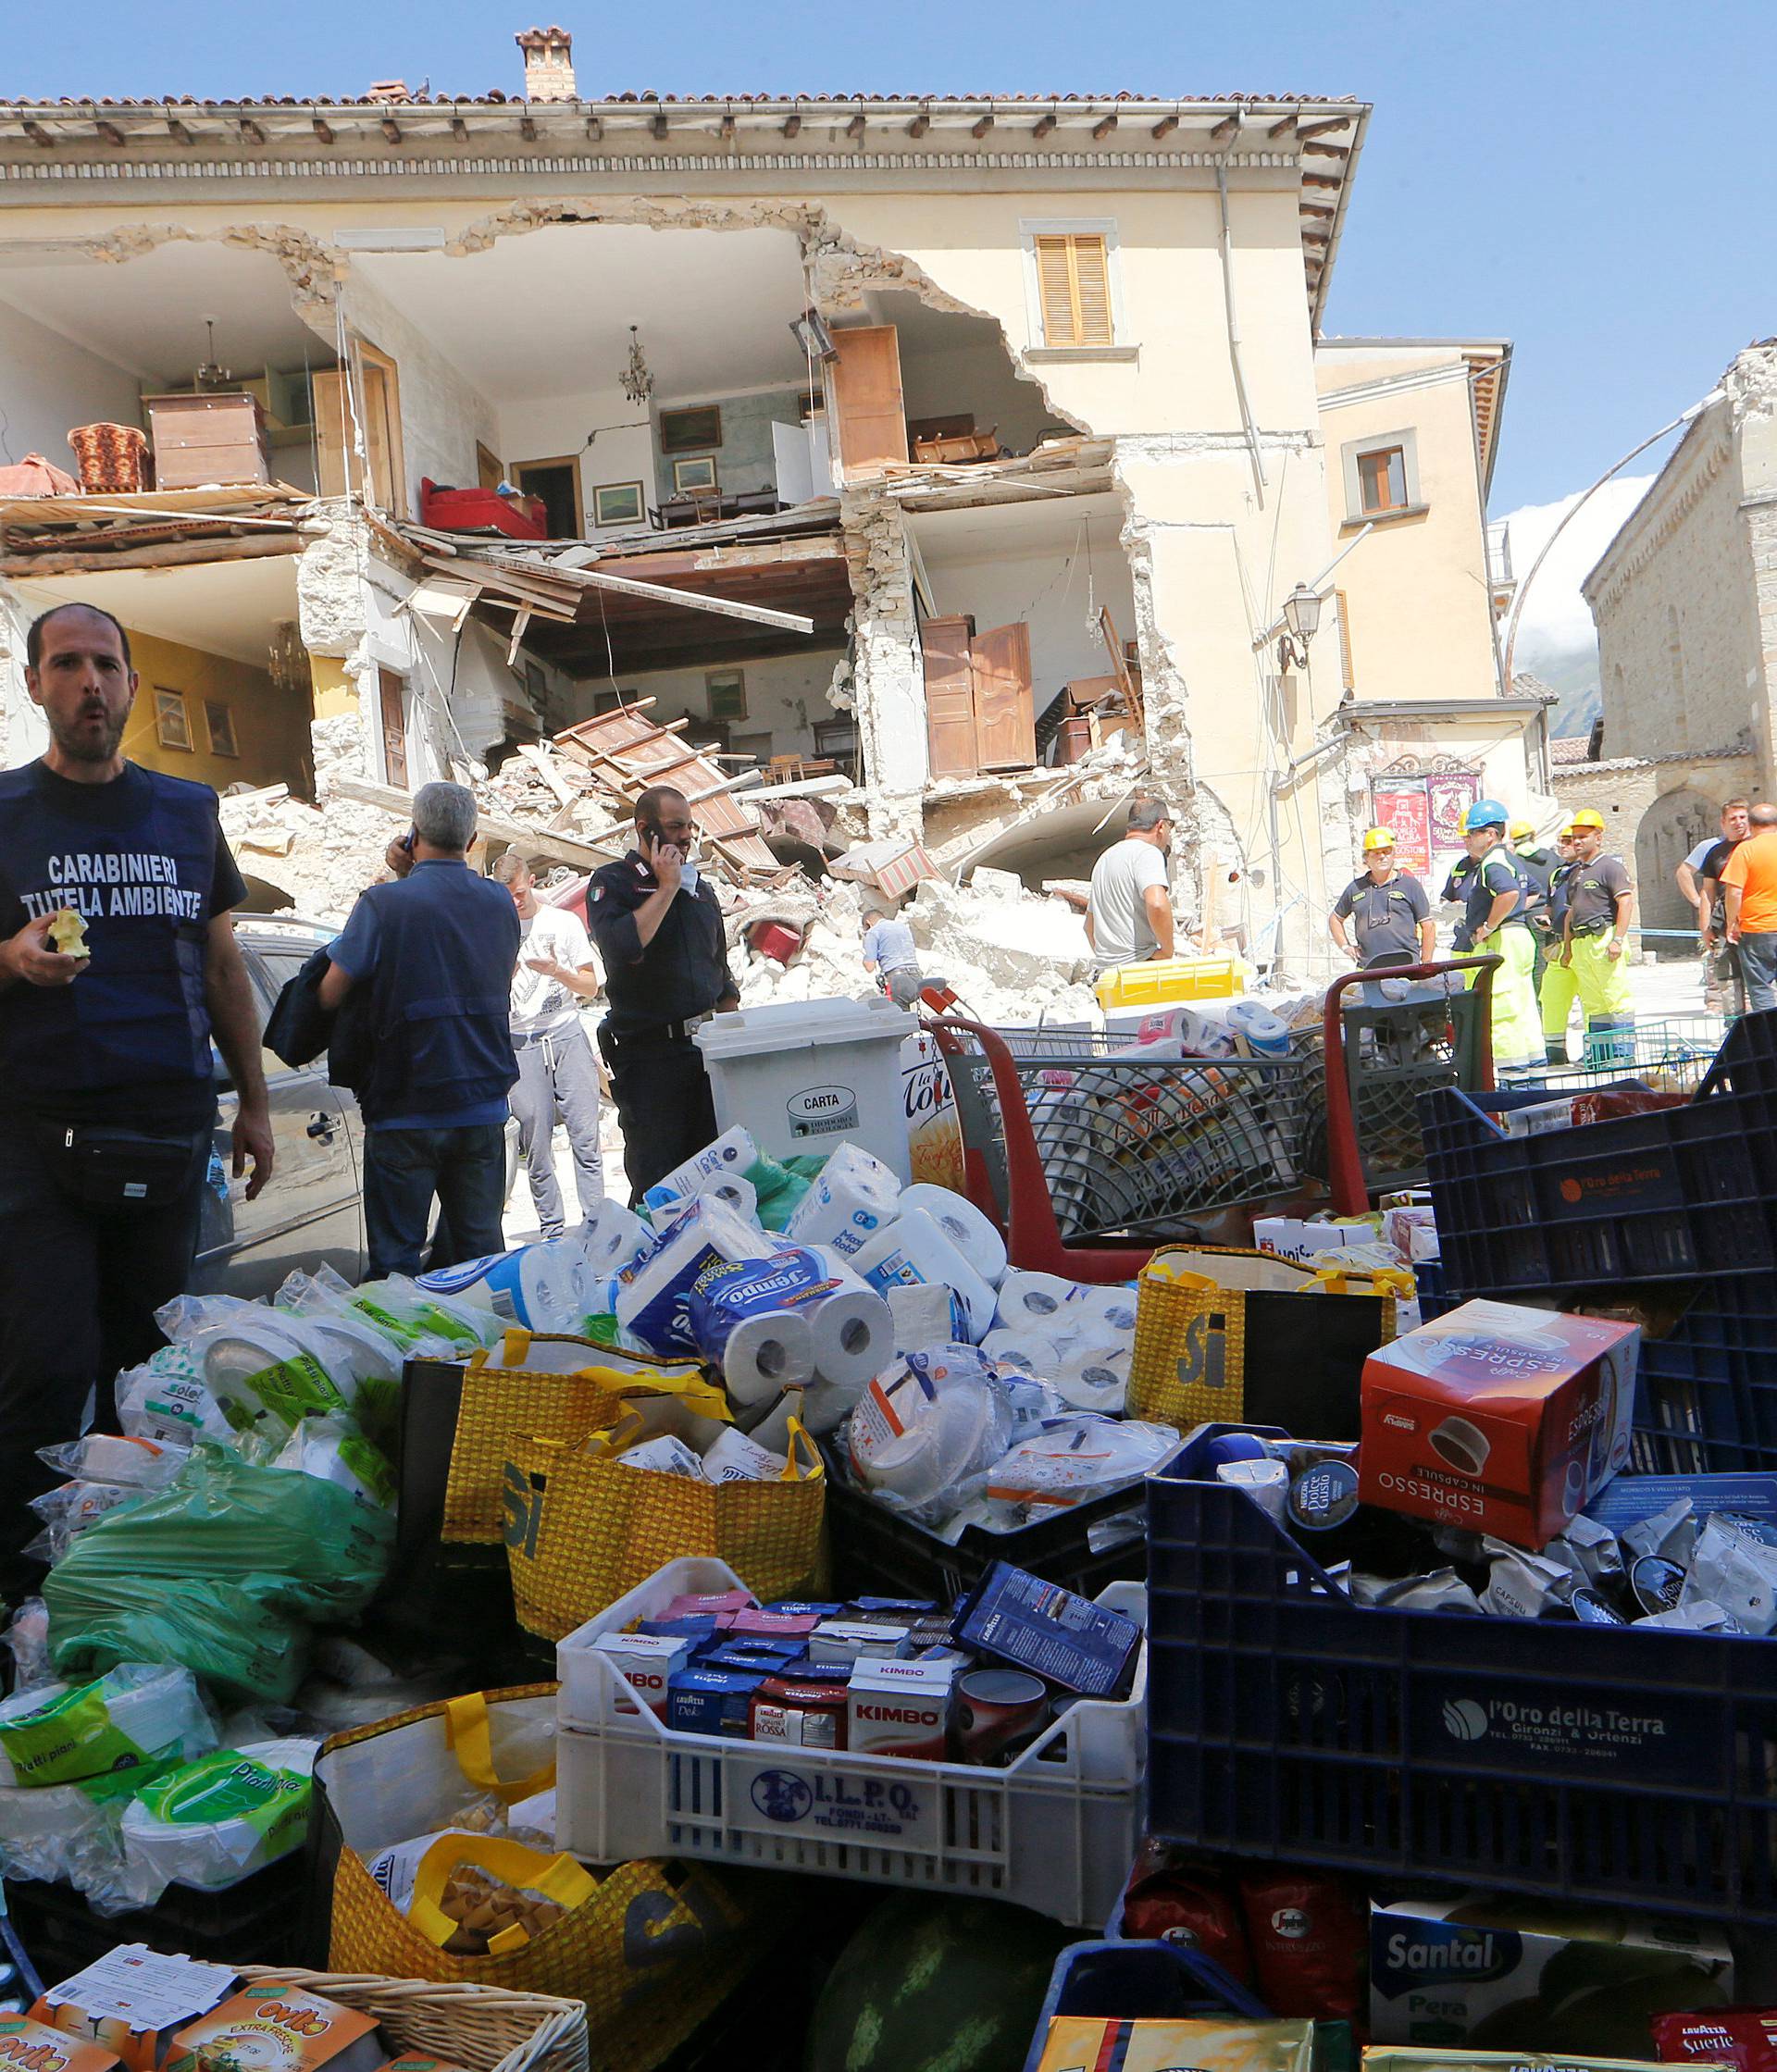 Rescuers prepare food and basic necessities in front of a partially collapsed building following an earthquake in Amatrice